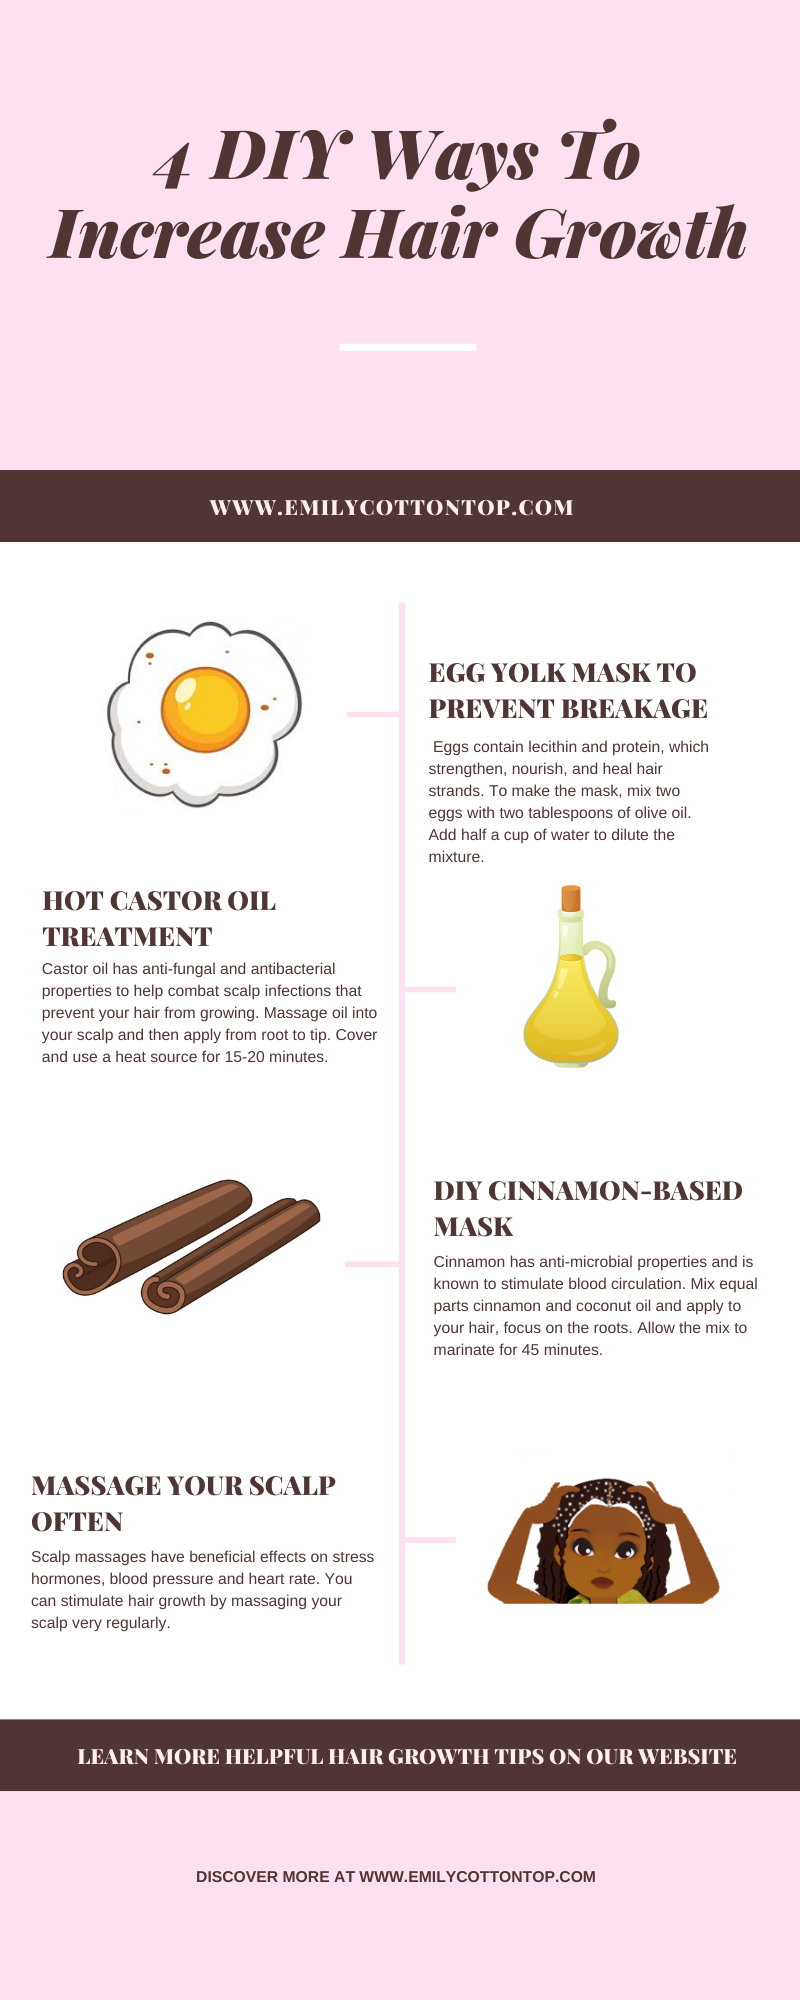 Try This Egg Hair Mask For Hair Growth And Retention - Emily CottonTop